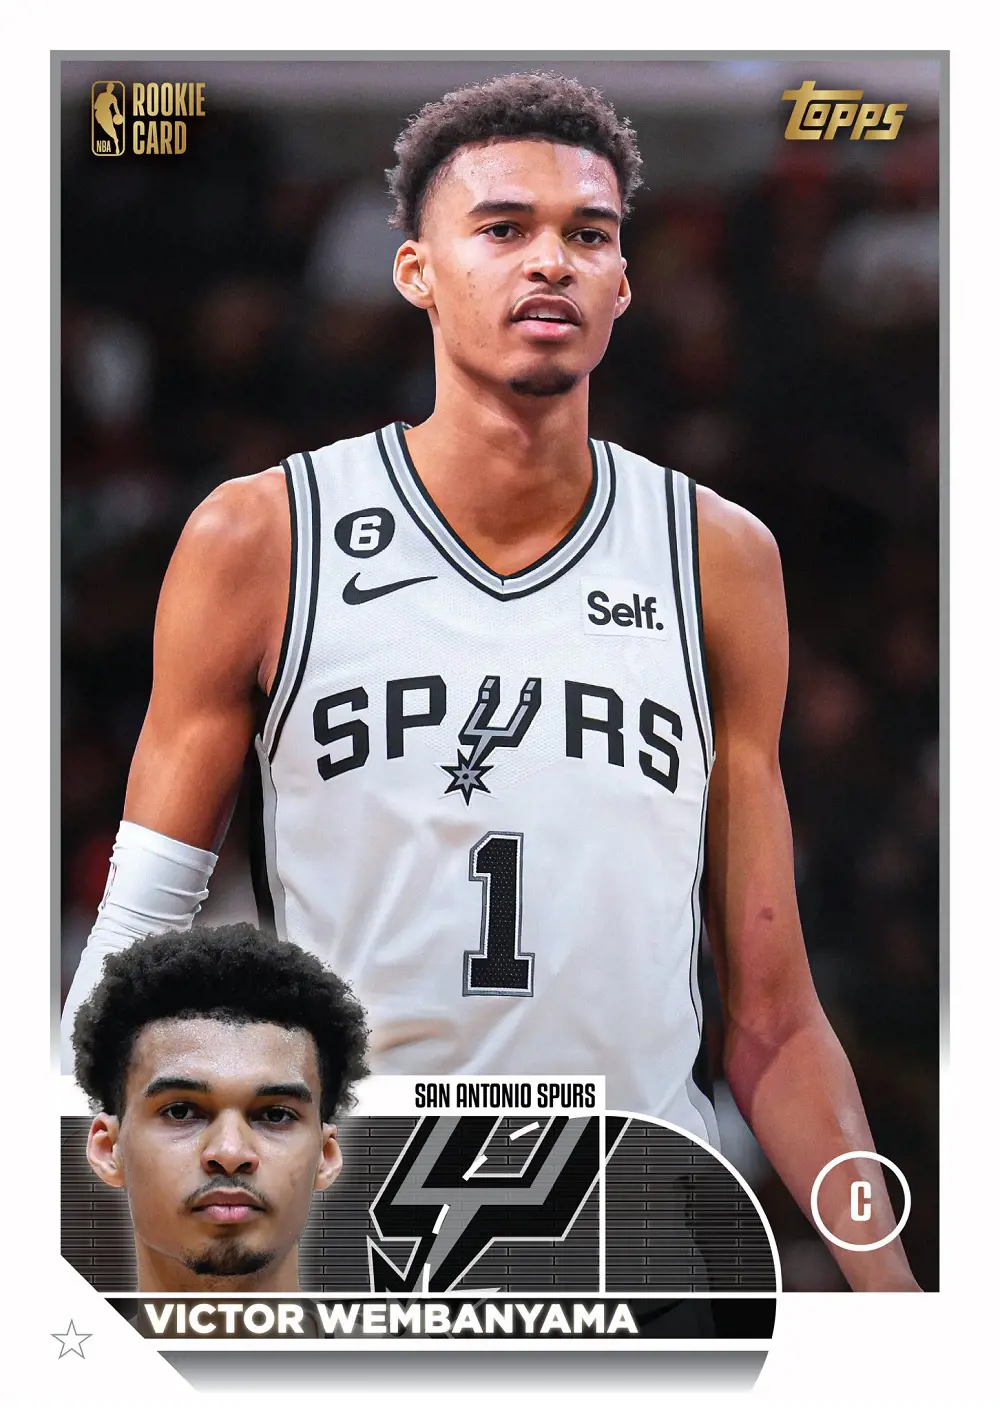 This is what the RC by Topps would look like when they release the 2023-24 NBA cards